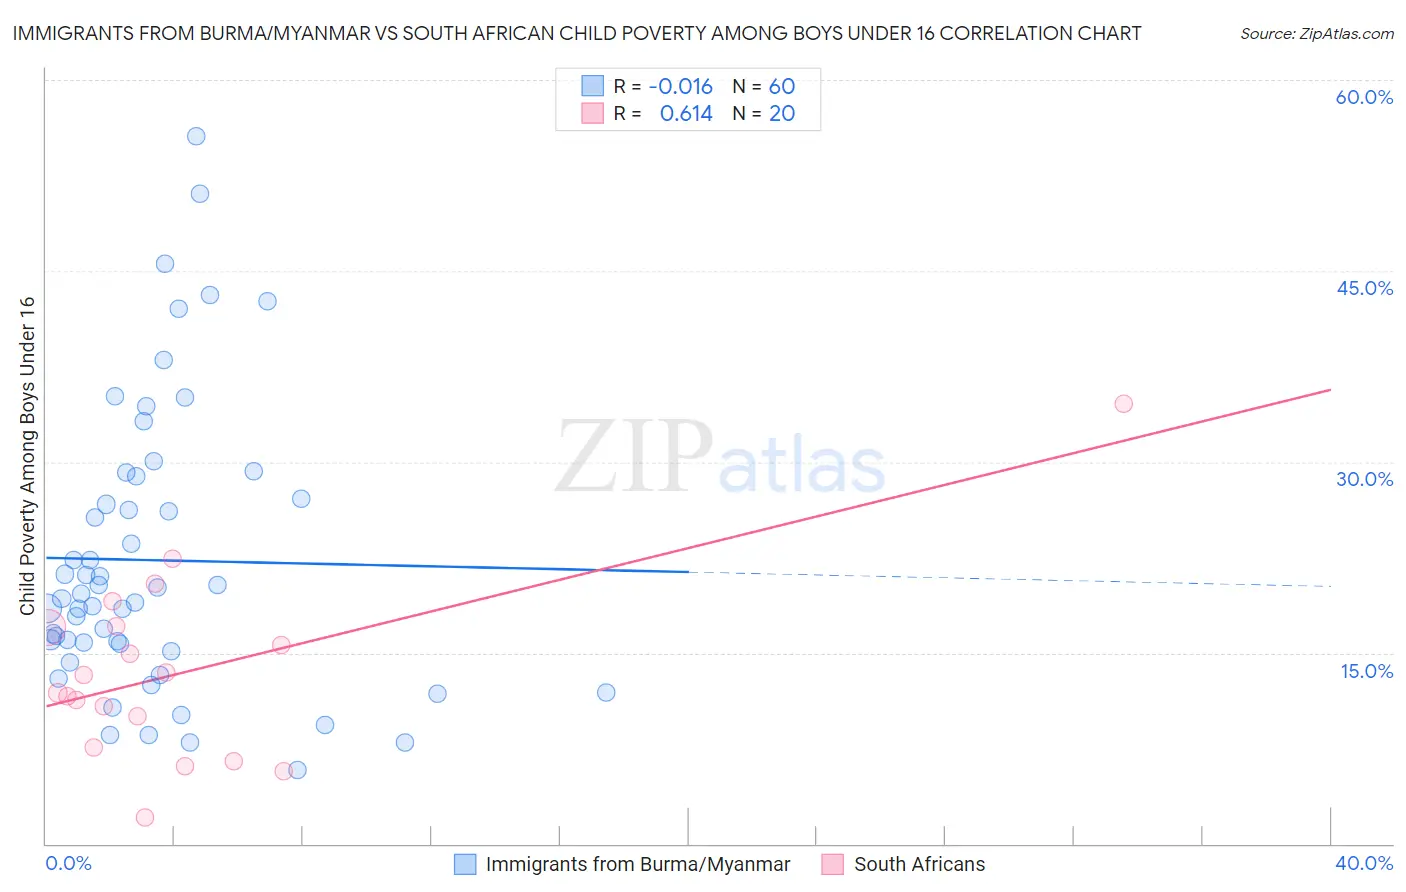 Immigrants from Burma/Myanmar vs South African Child Poverty Among Boys Under 16